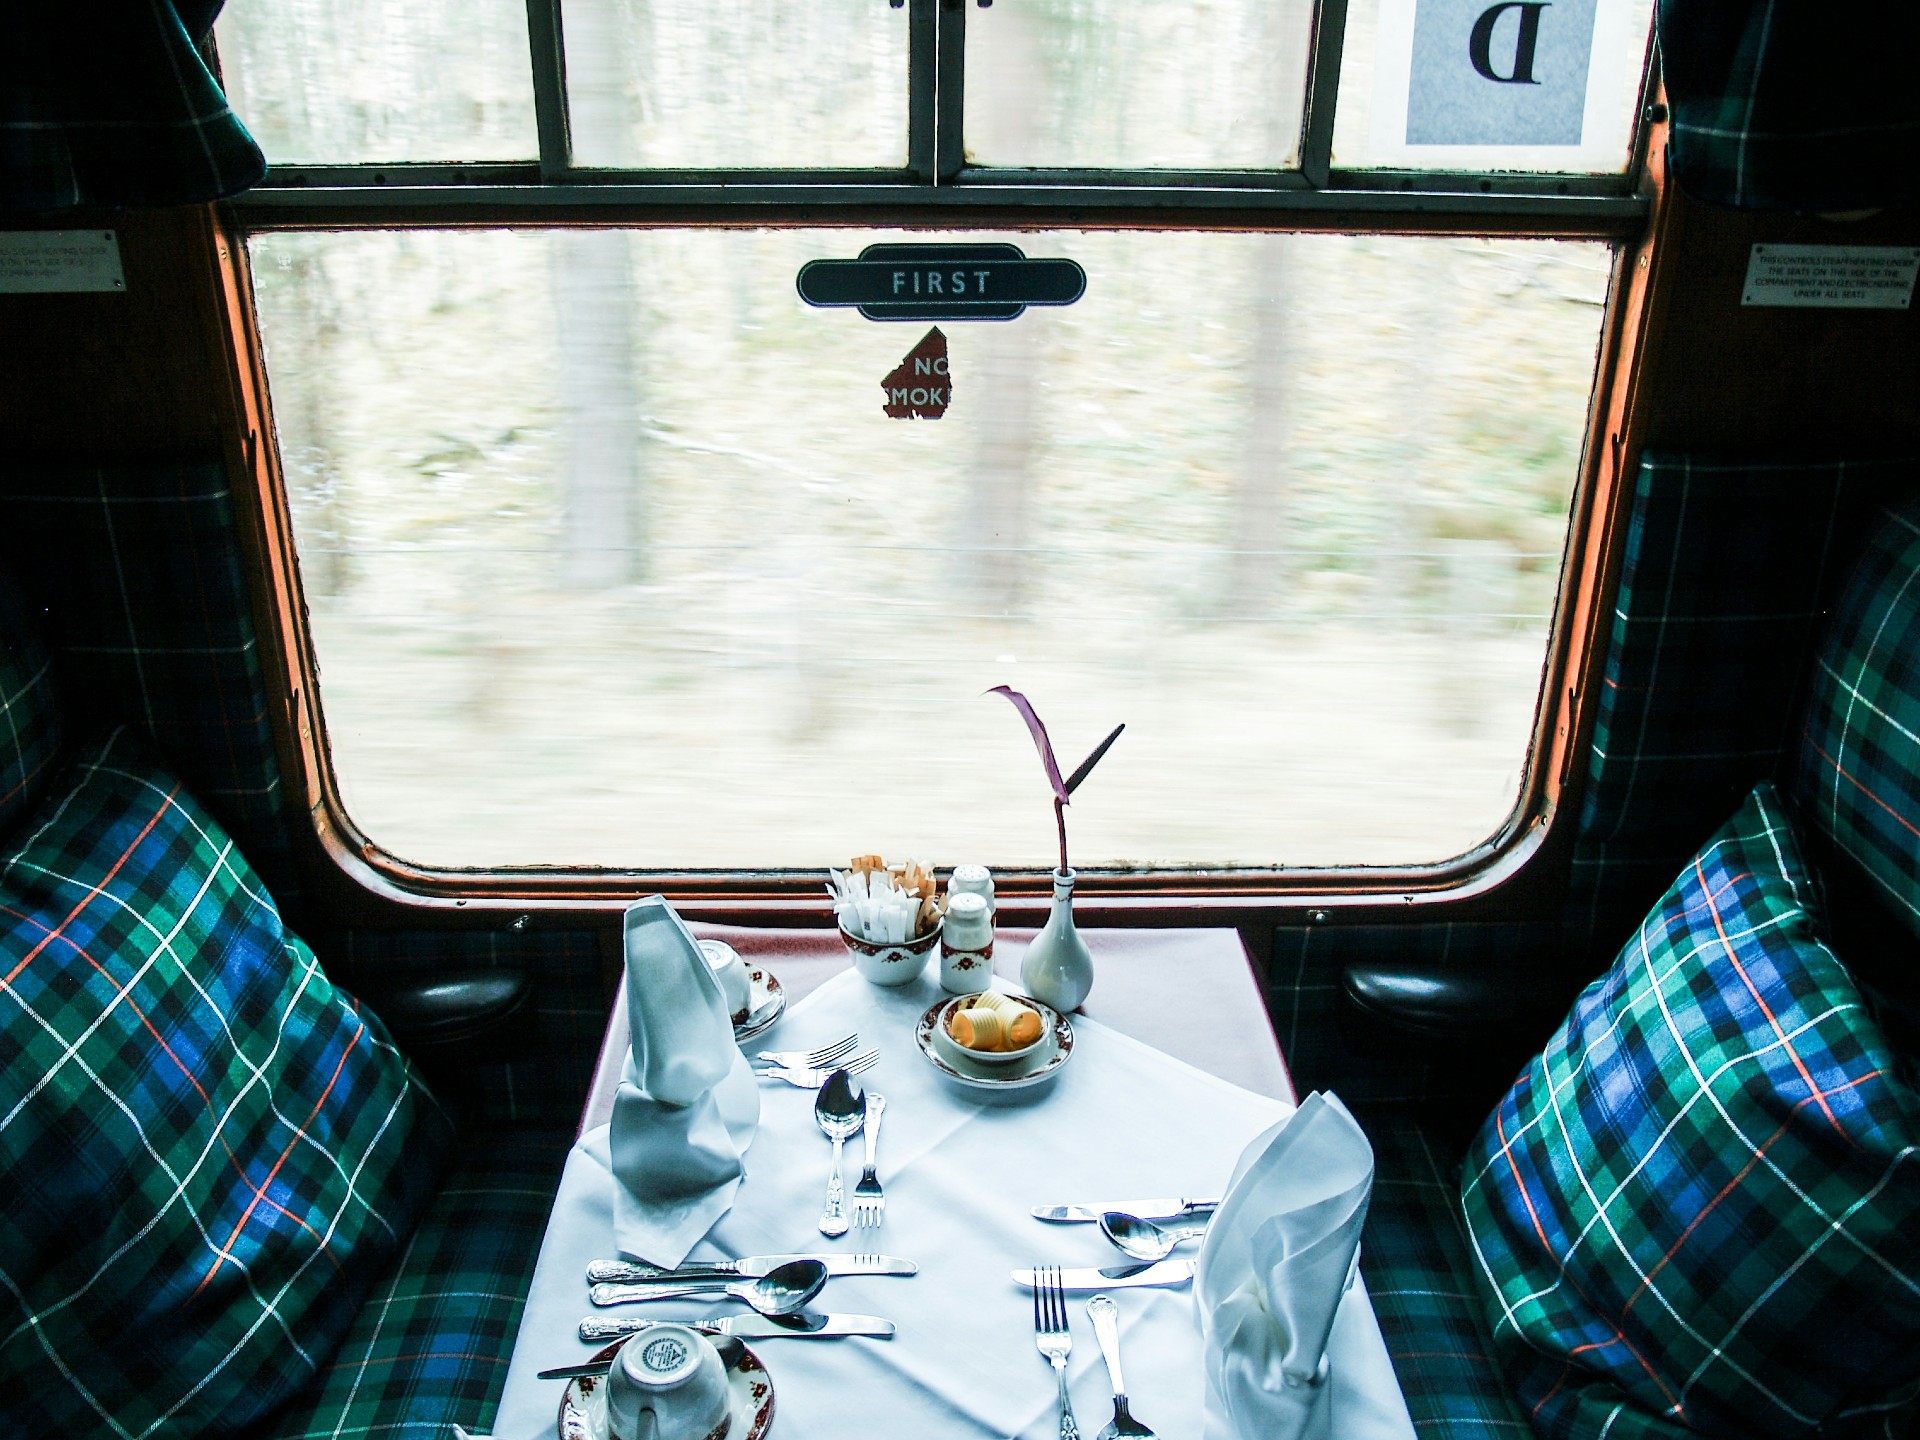 Table setting looking out train window